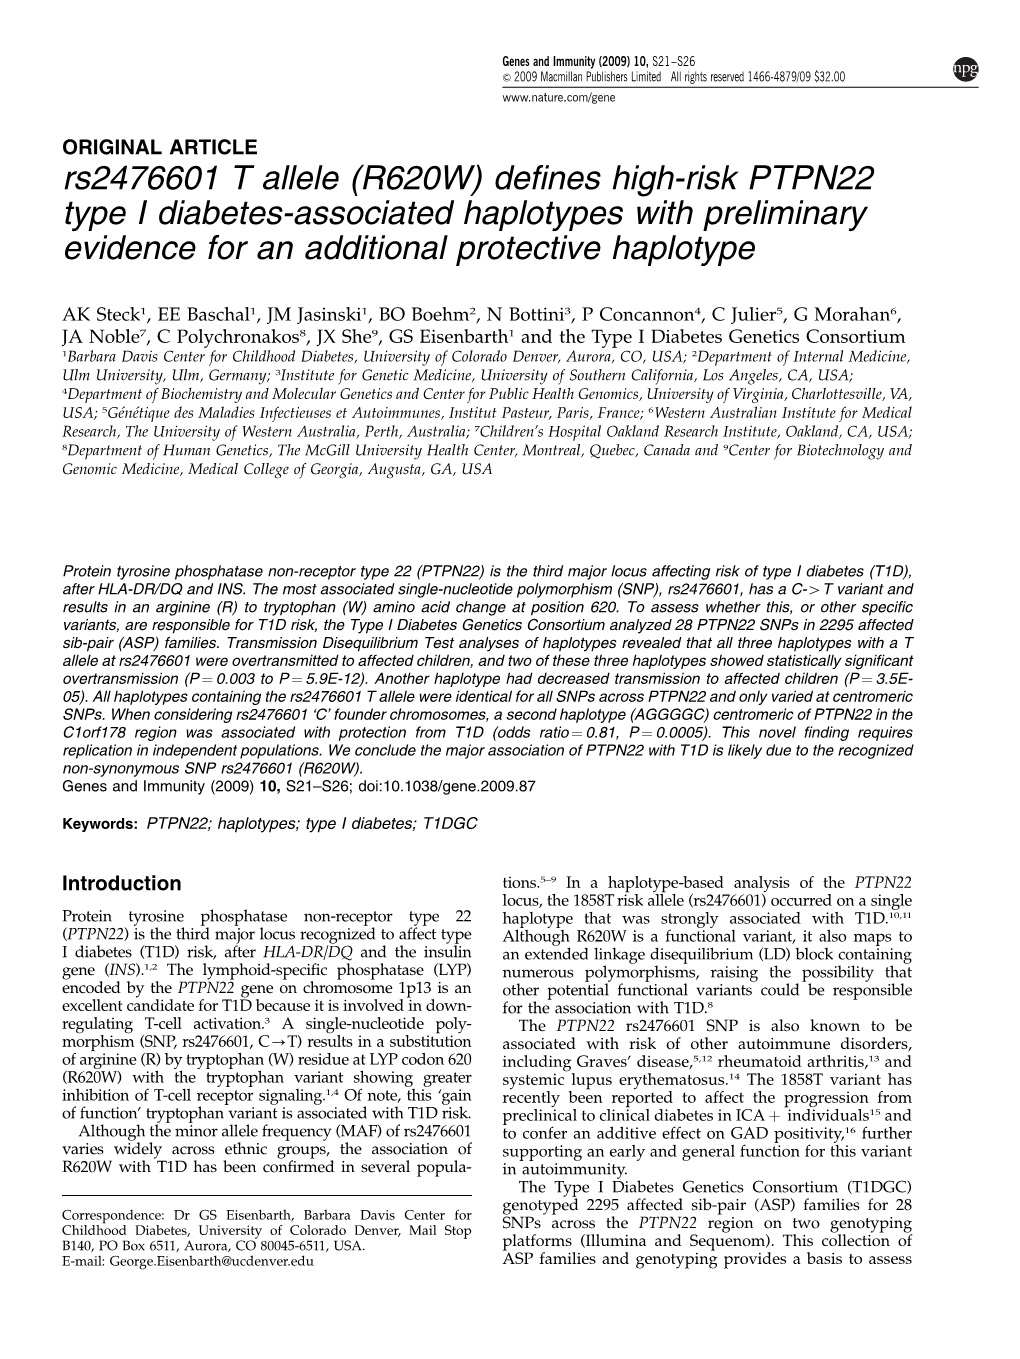 Rs2476601 T Allele (R620W) Defines High-Risk PTPN22 Type I Diabetes-Associated Haplotypes with Preliminary Evidence for an Additional Protective Haplotype